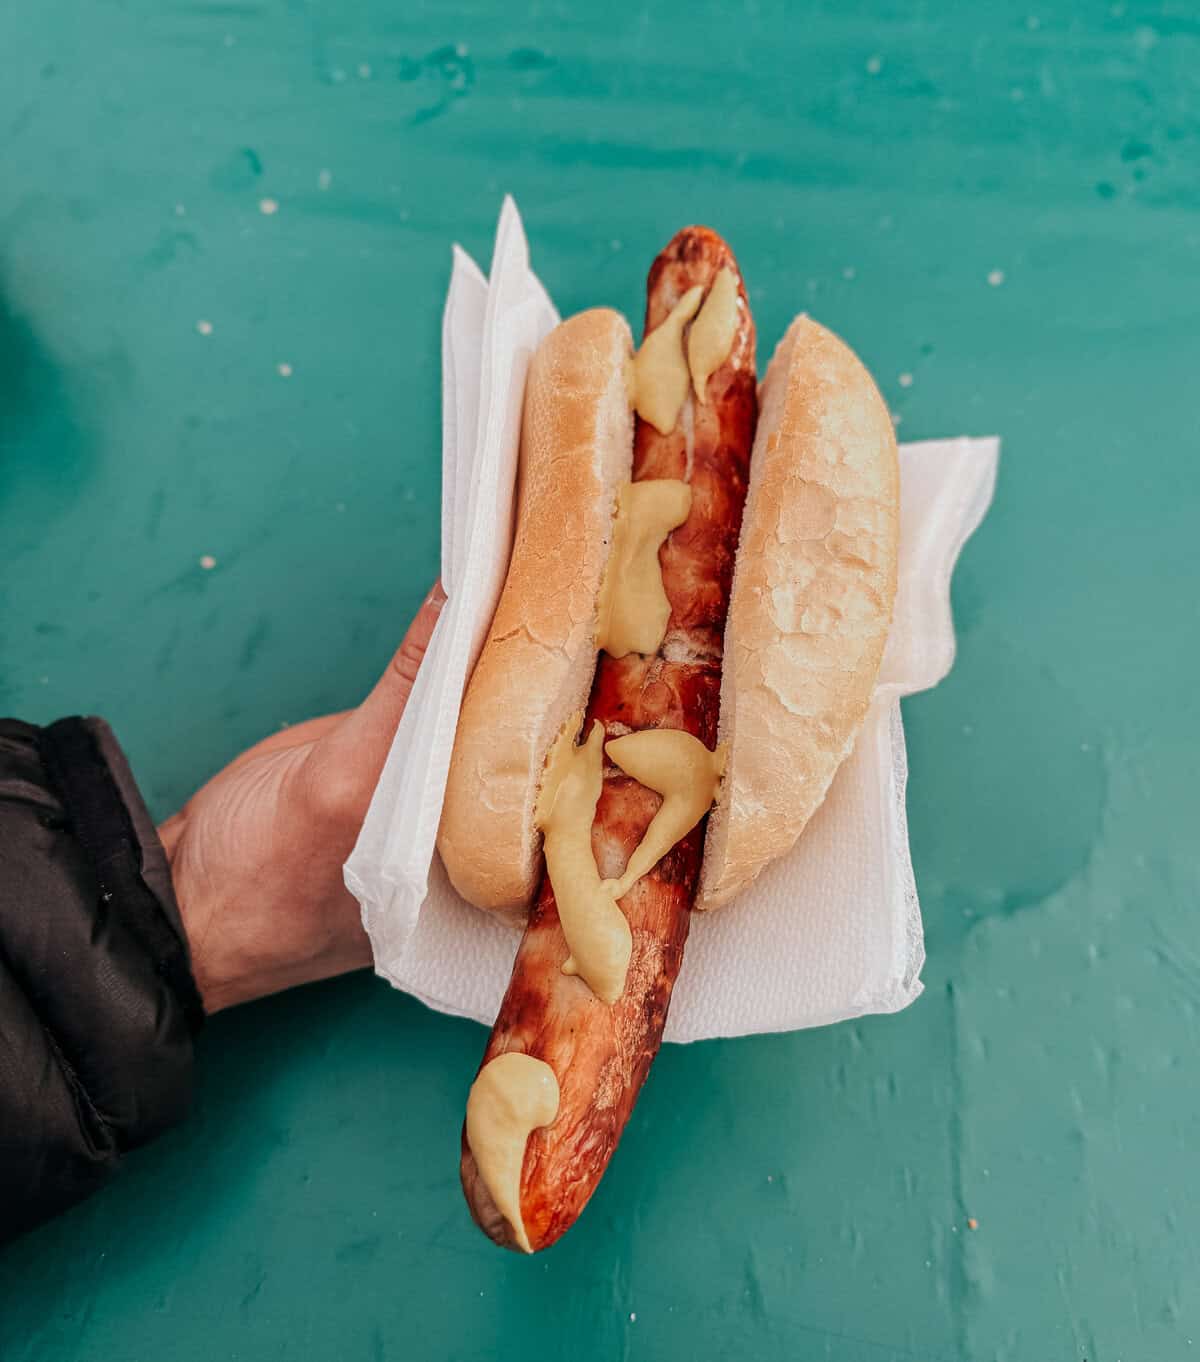 A hand holds a bratwurst sandwich with a crispy sausage topped with creamy mustard on a split white roll, set against a teal background